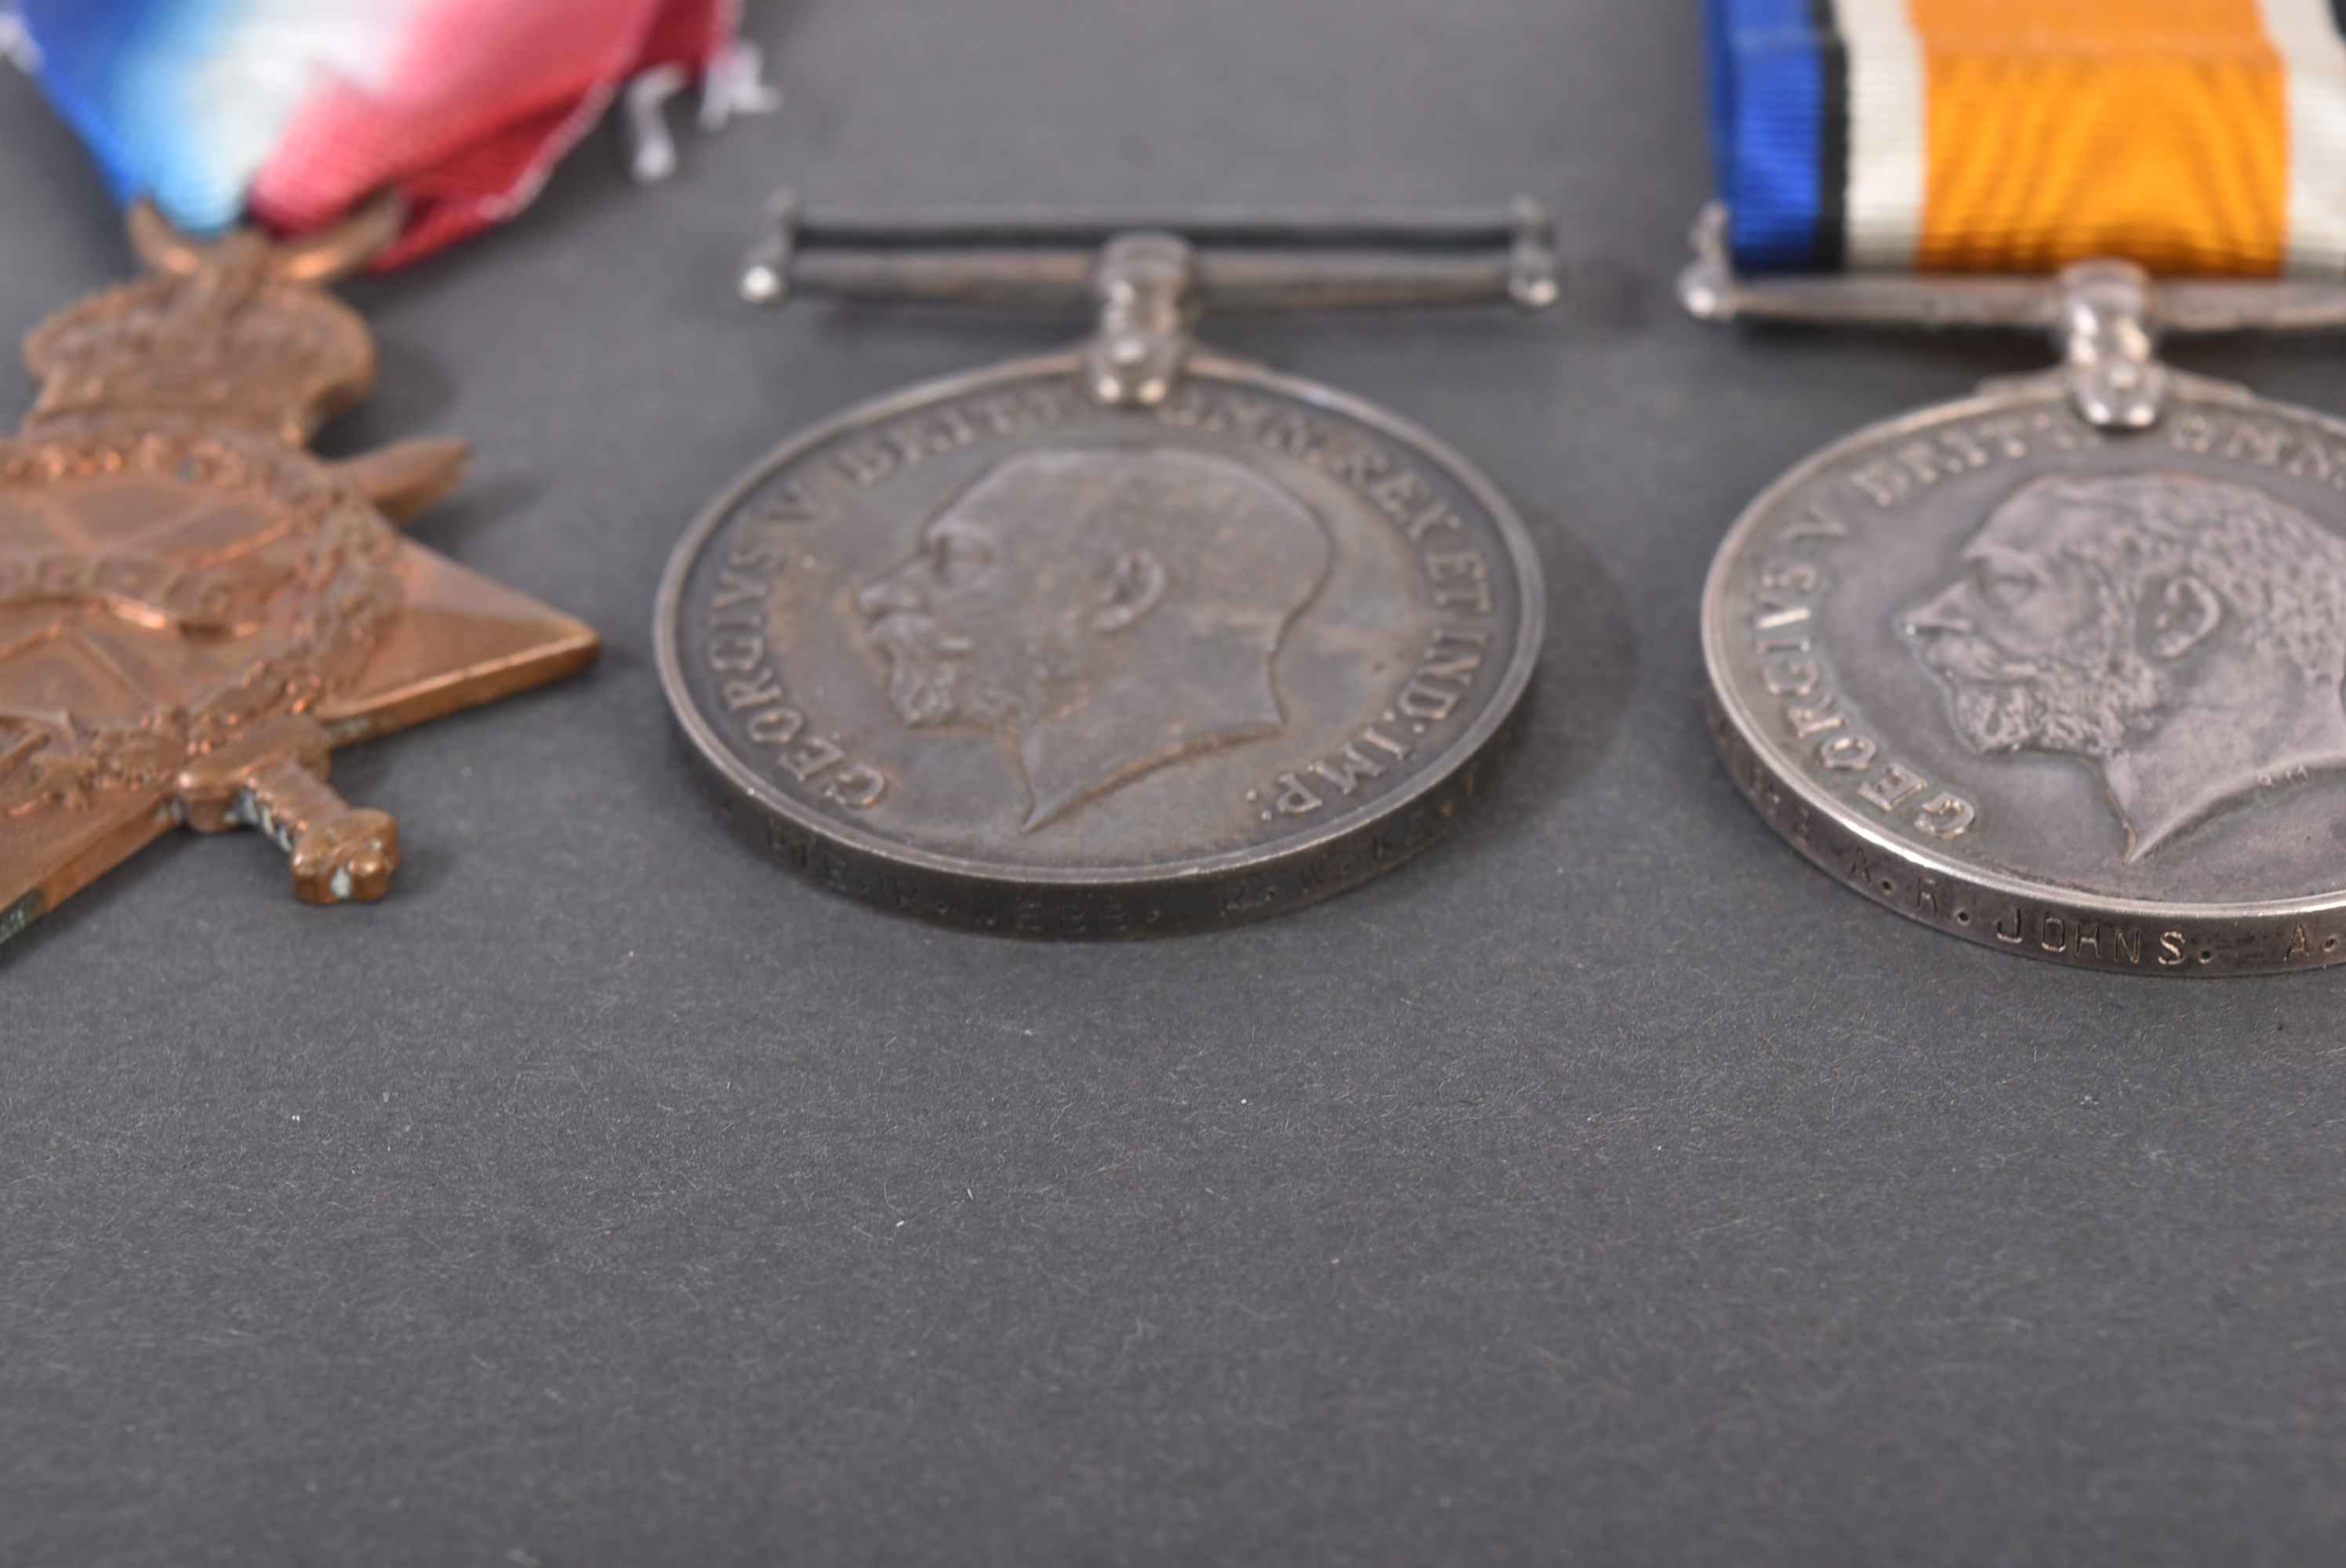 COLLECTION OF UNRELATED FIRST WORLD WAR CAMPAIGN MEDALS - Image 7 of 7